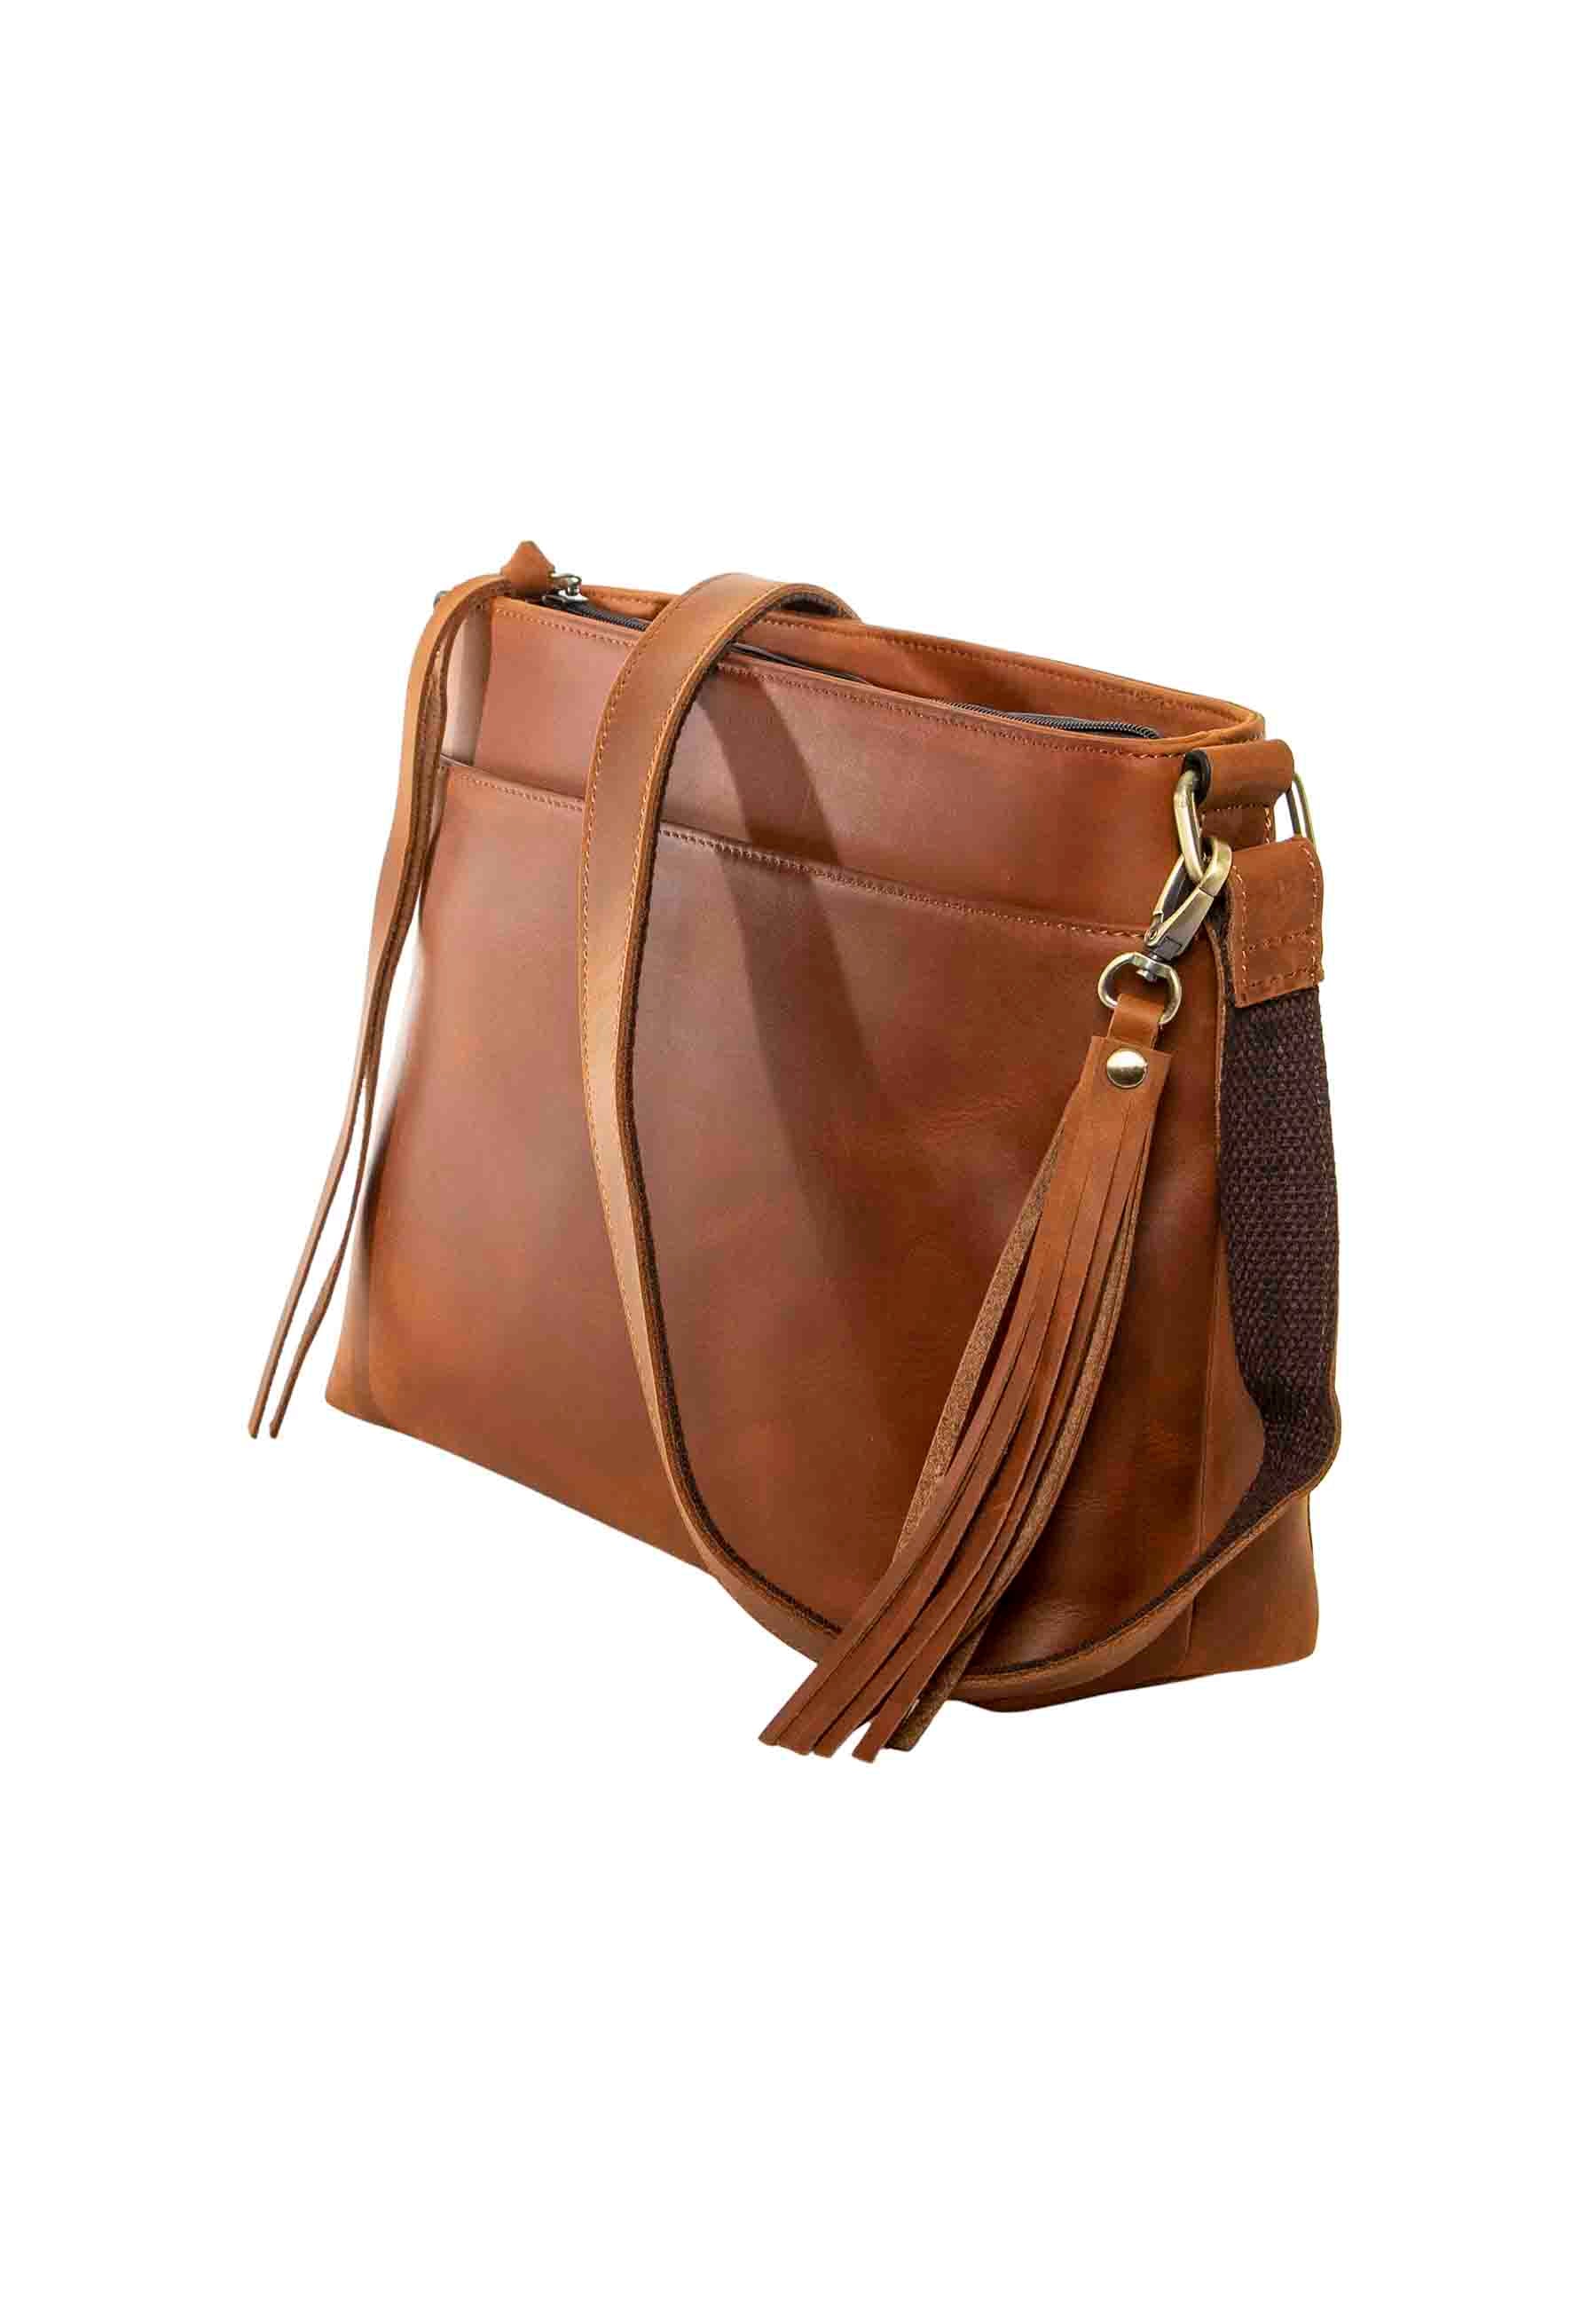 angle view of pistol purse in brown leather